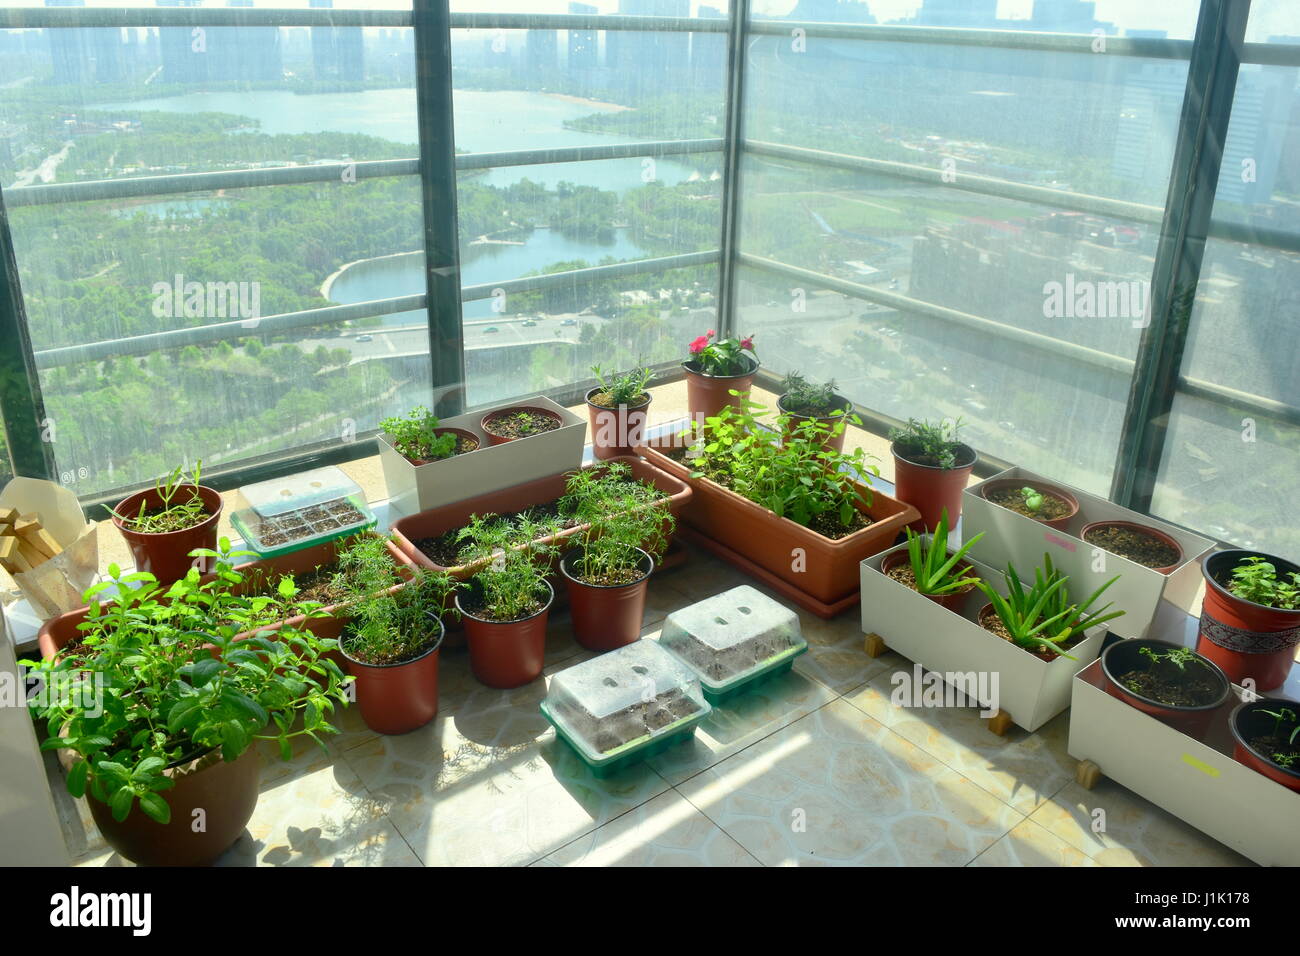 Organic apartment garden, with young green herbs and plants taking in the sunlight Stock Photo